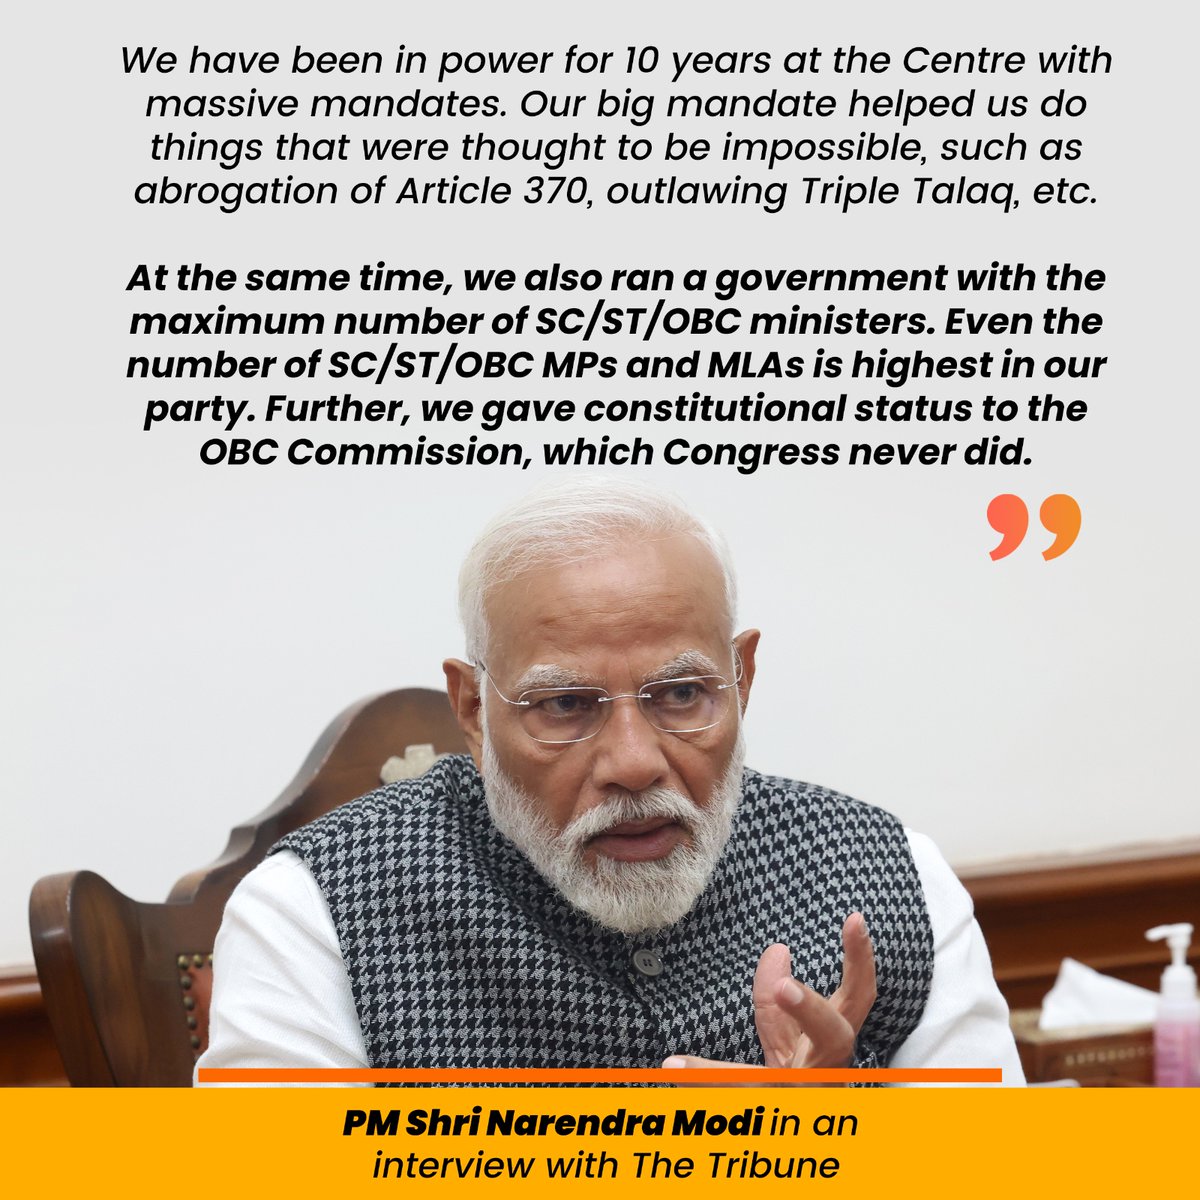 We have been in power for 10 years at the Centre with massive mandates. Our big mandate helped us do things that were thought to be impossible, such as abrogation of Article 370, outlawing Triple Talaq, etc. - PM Shri @narendramodi